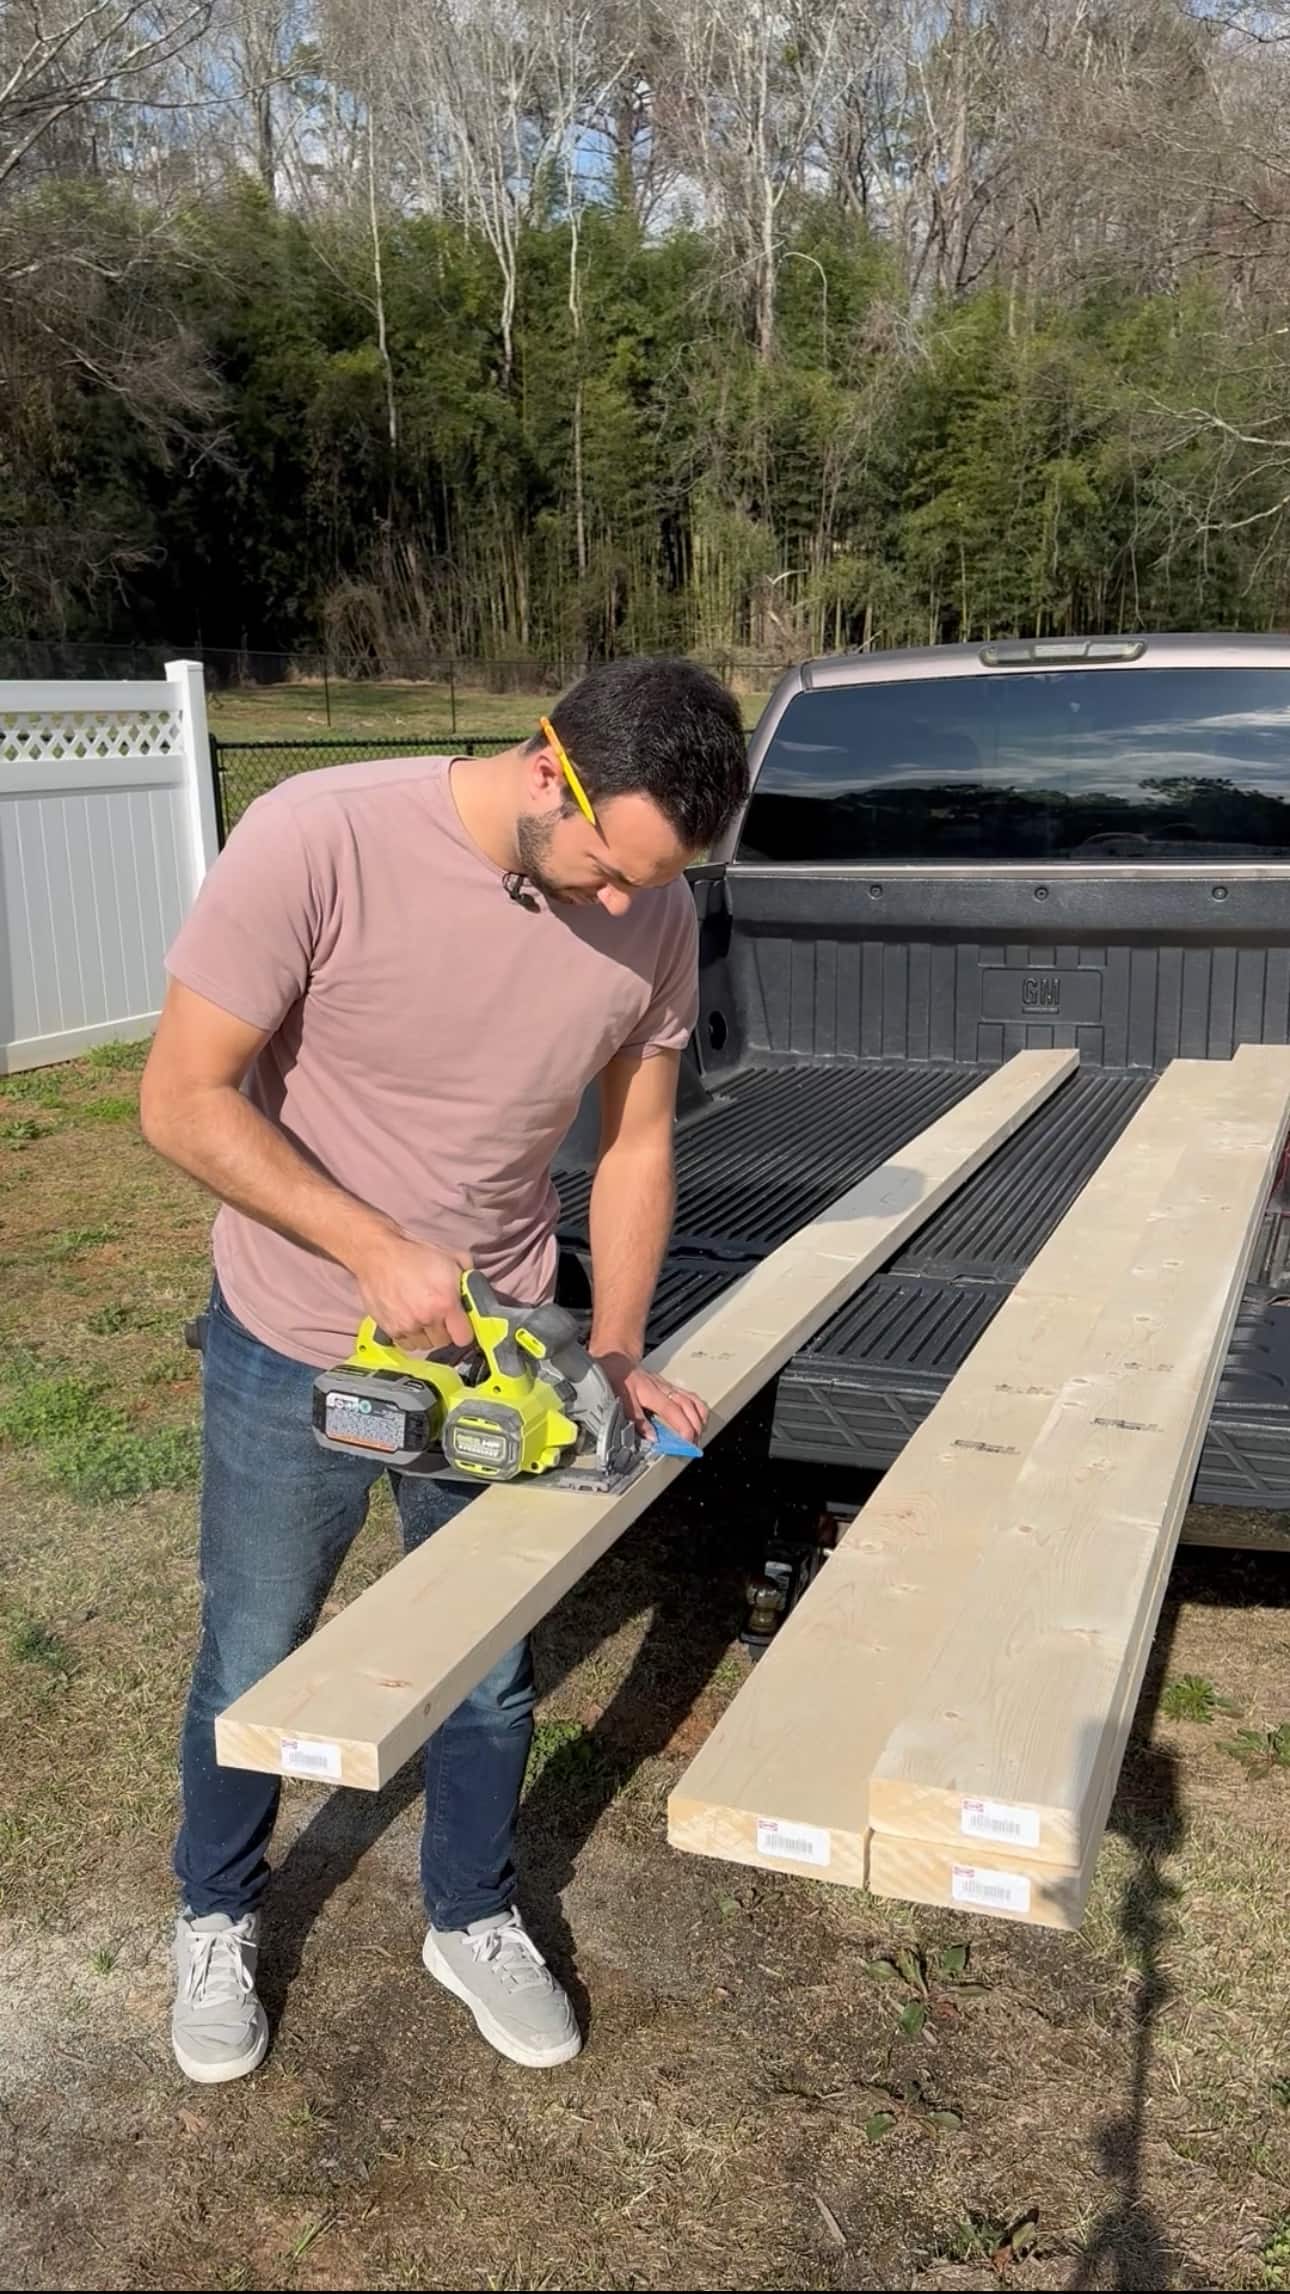  Clayton uses his Ryobi tools to cut boards for his garden bed